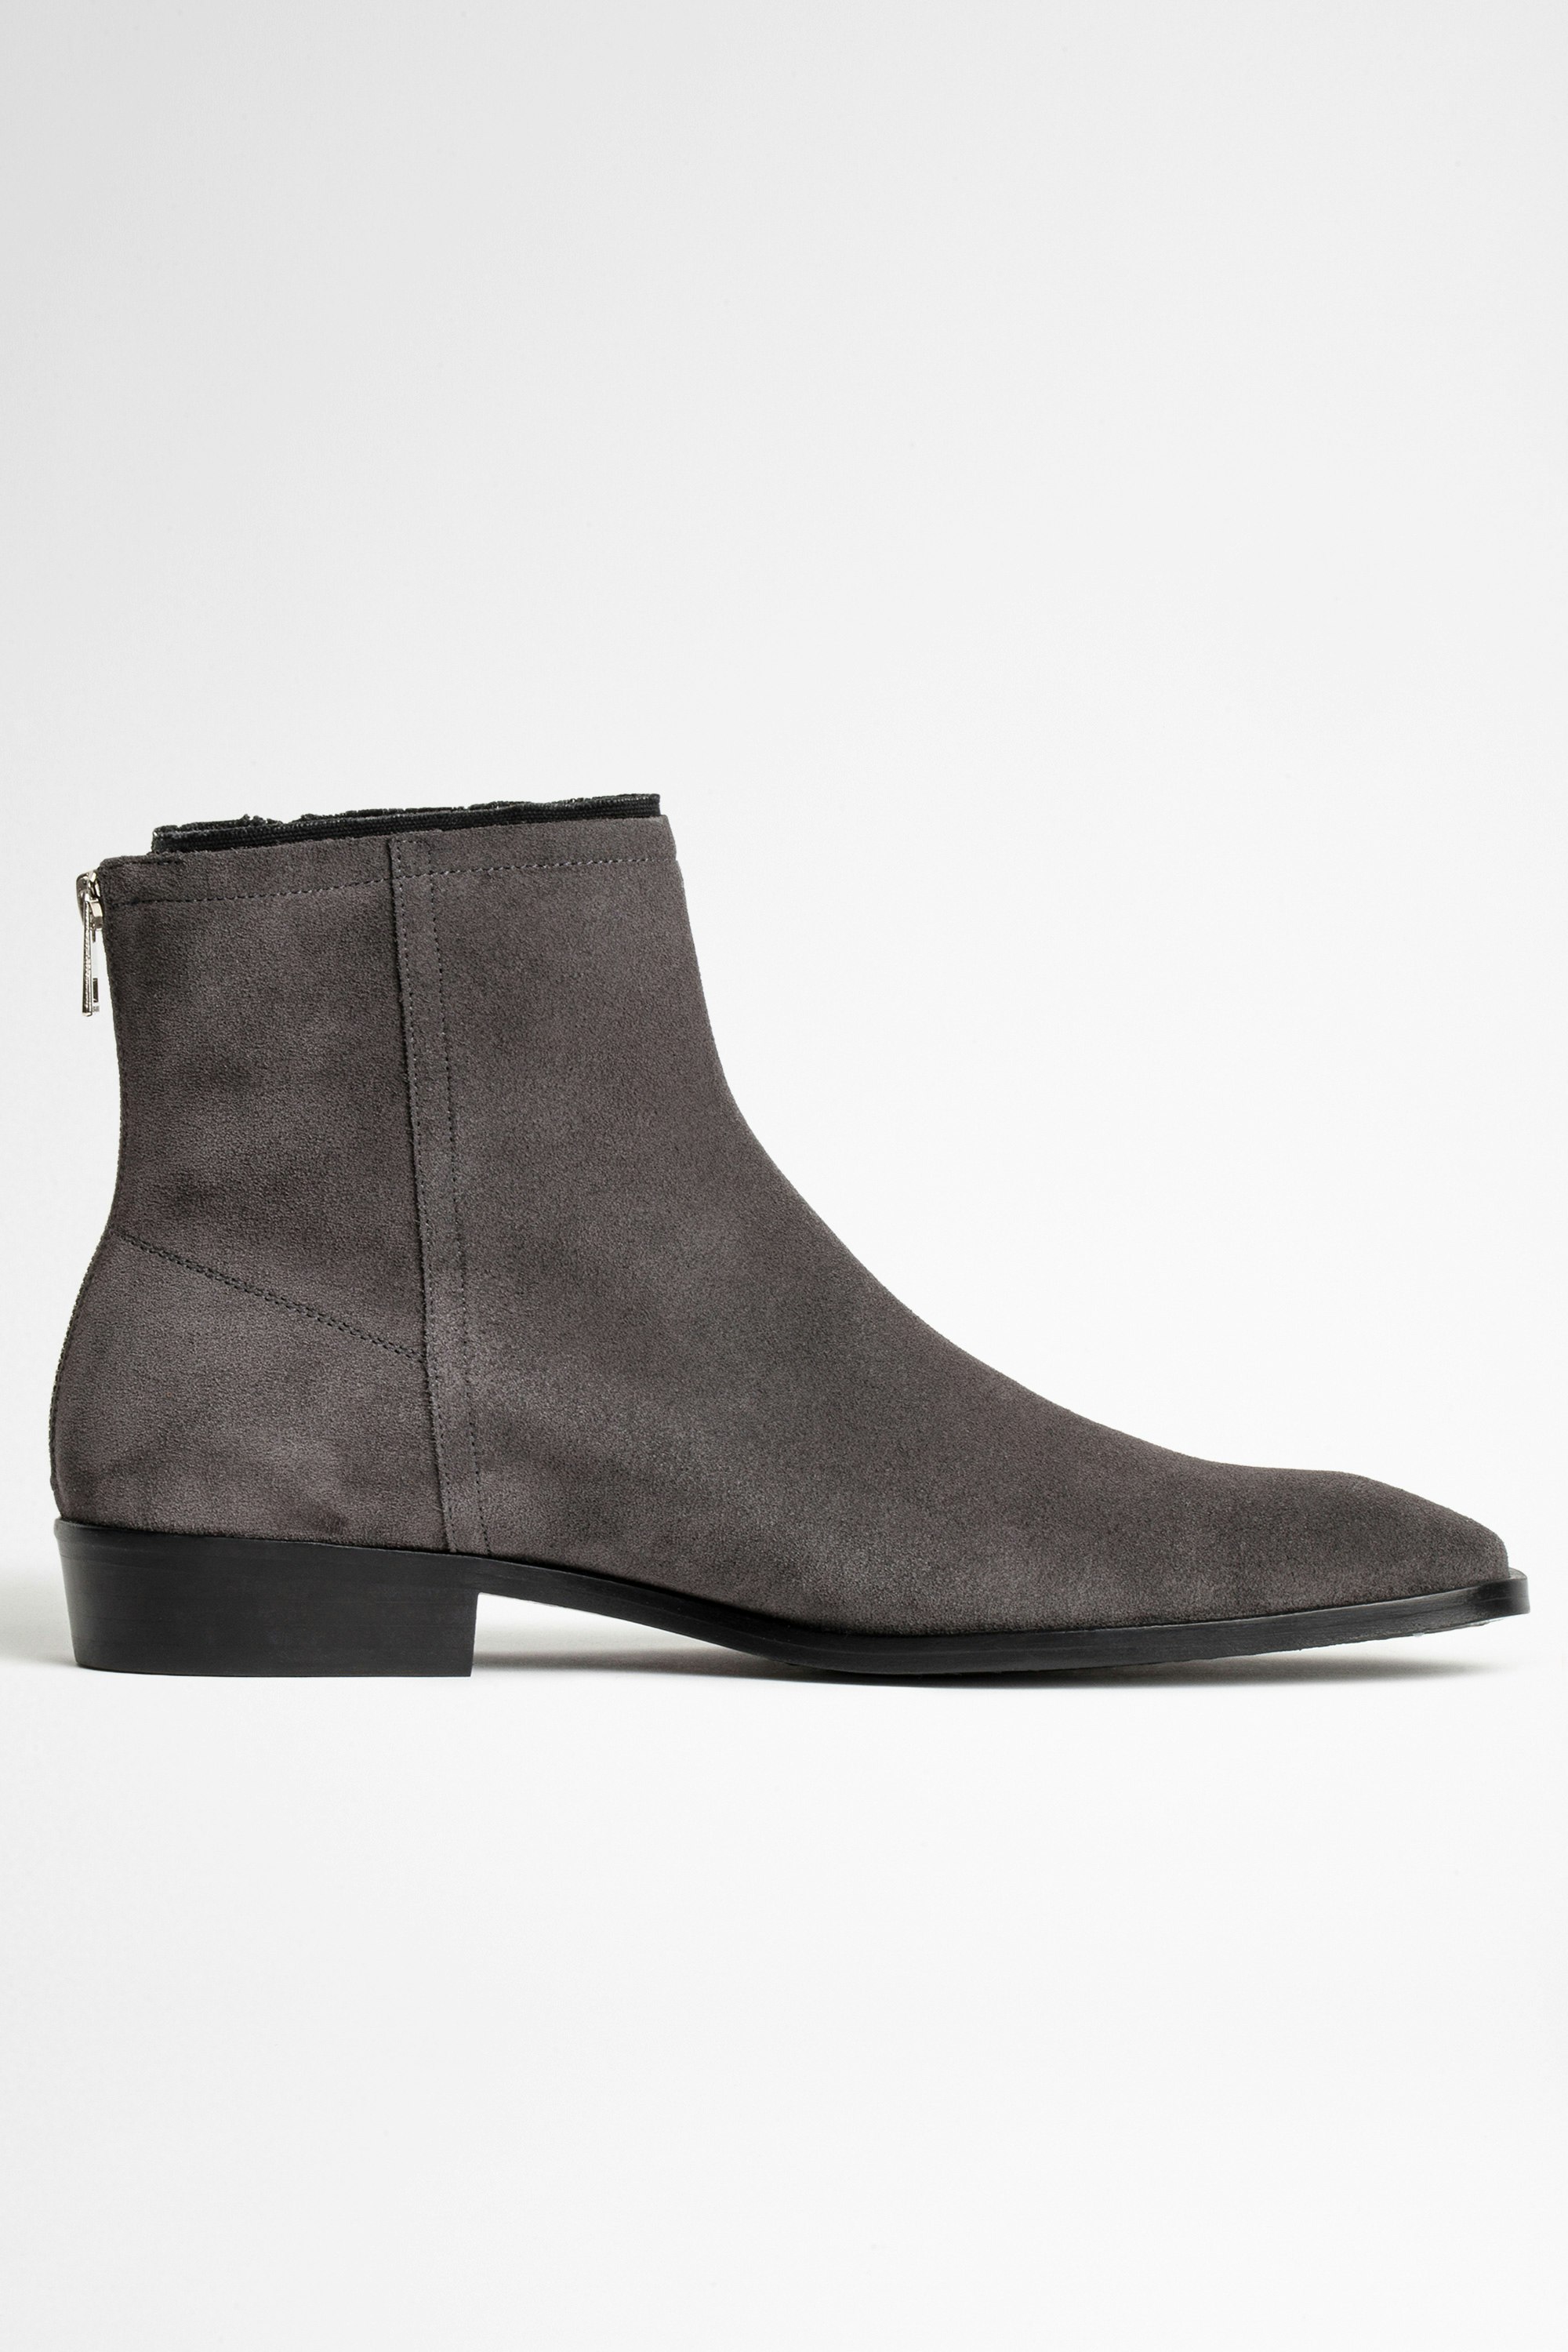 Suede Ankle Boots Leather Men's grey suede ankle boots